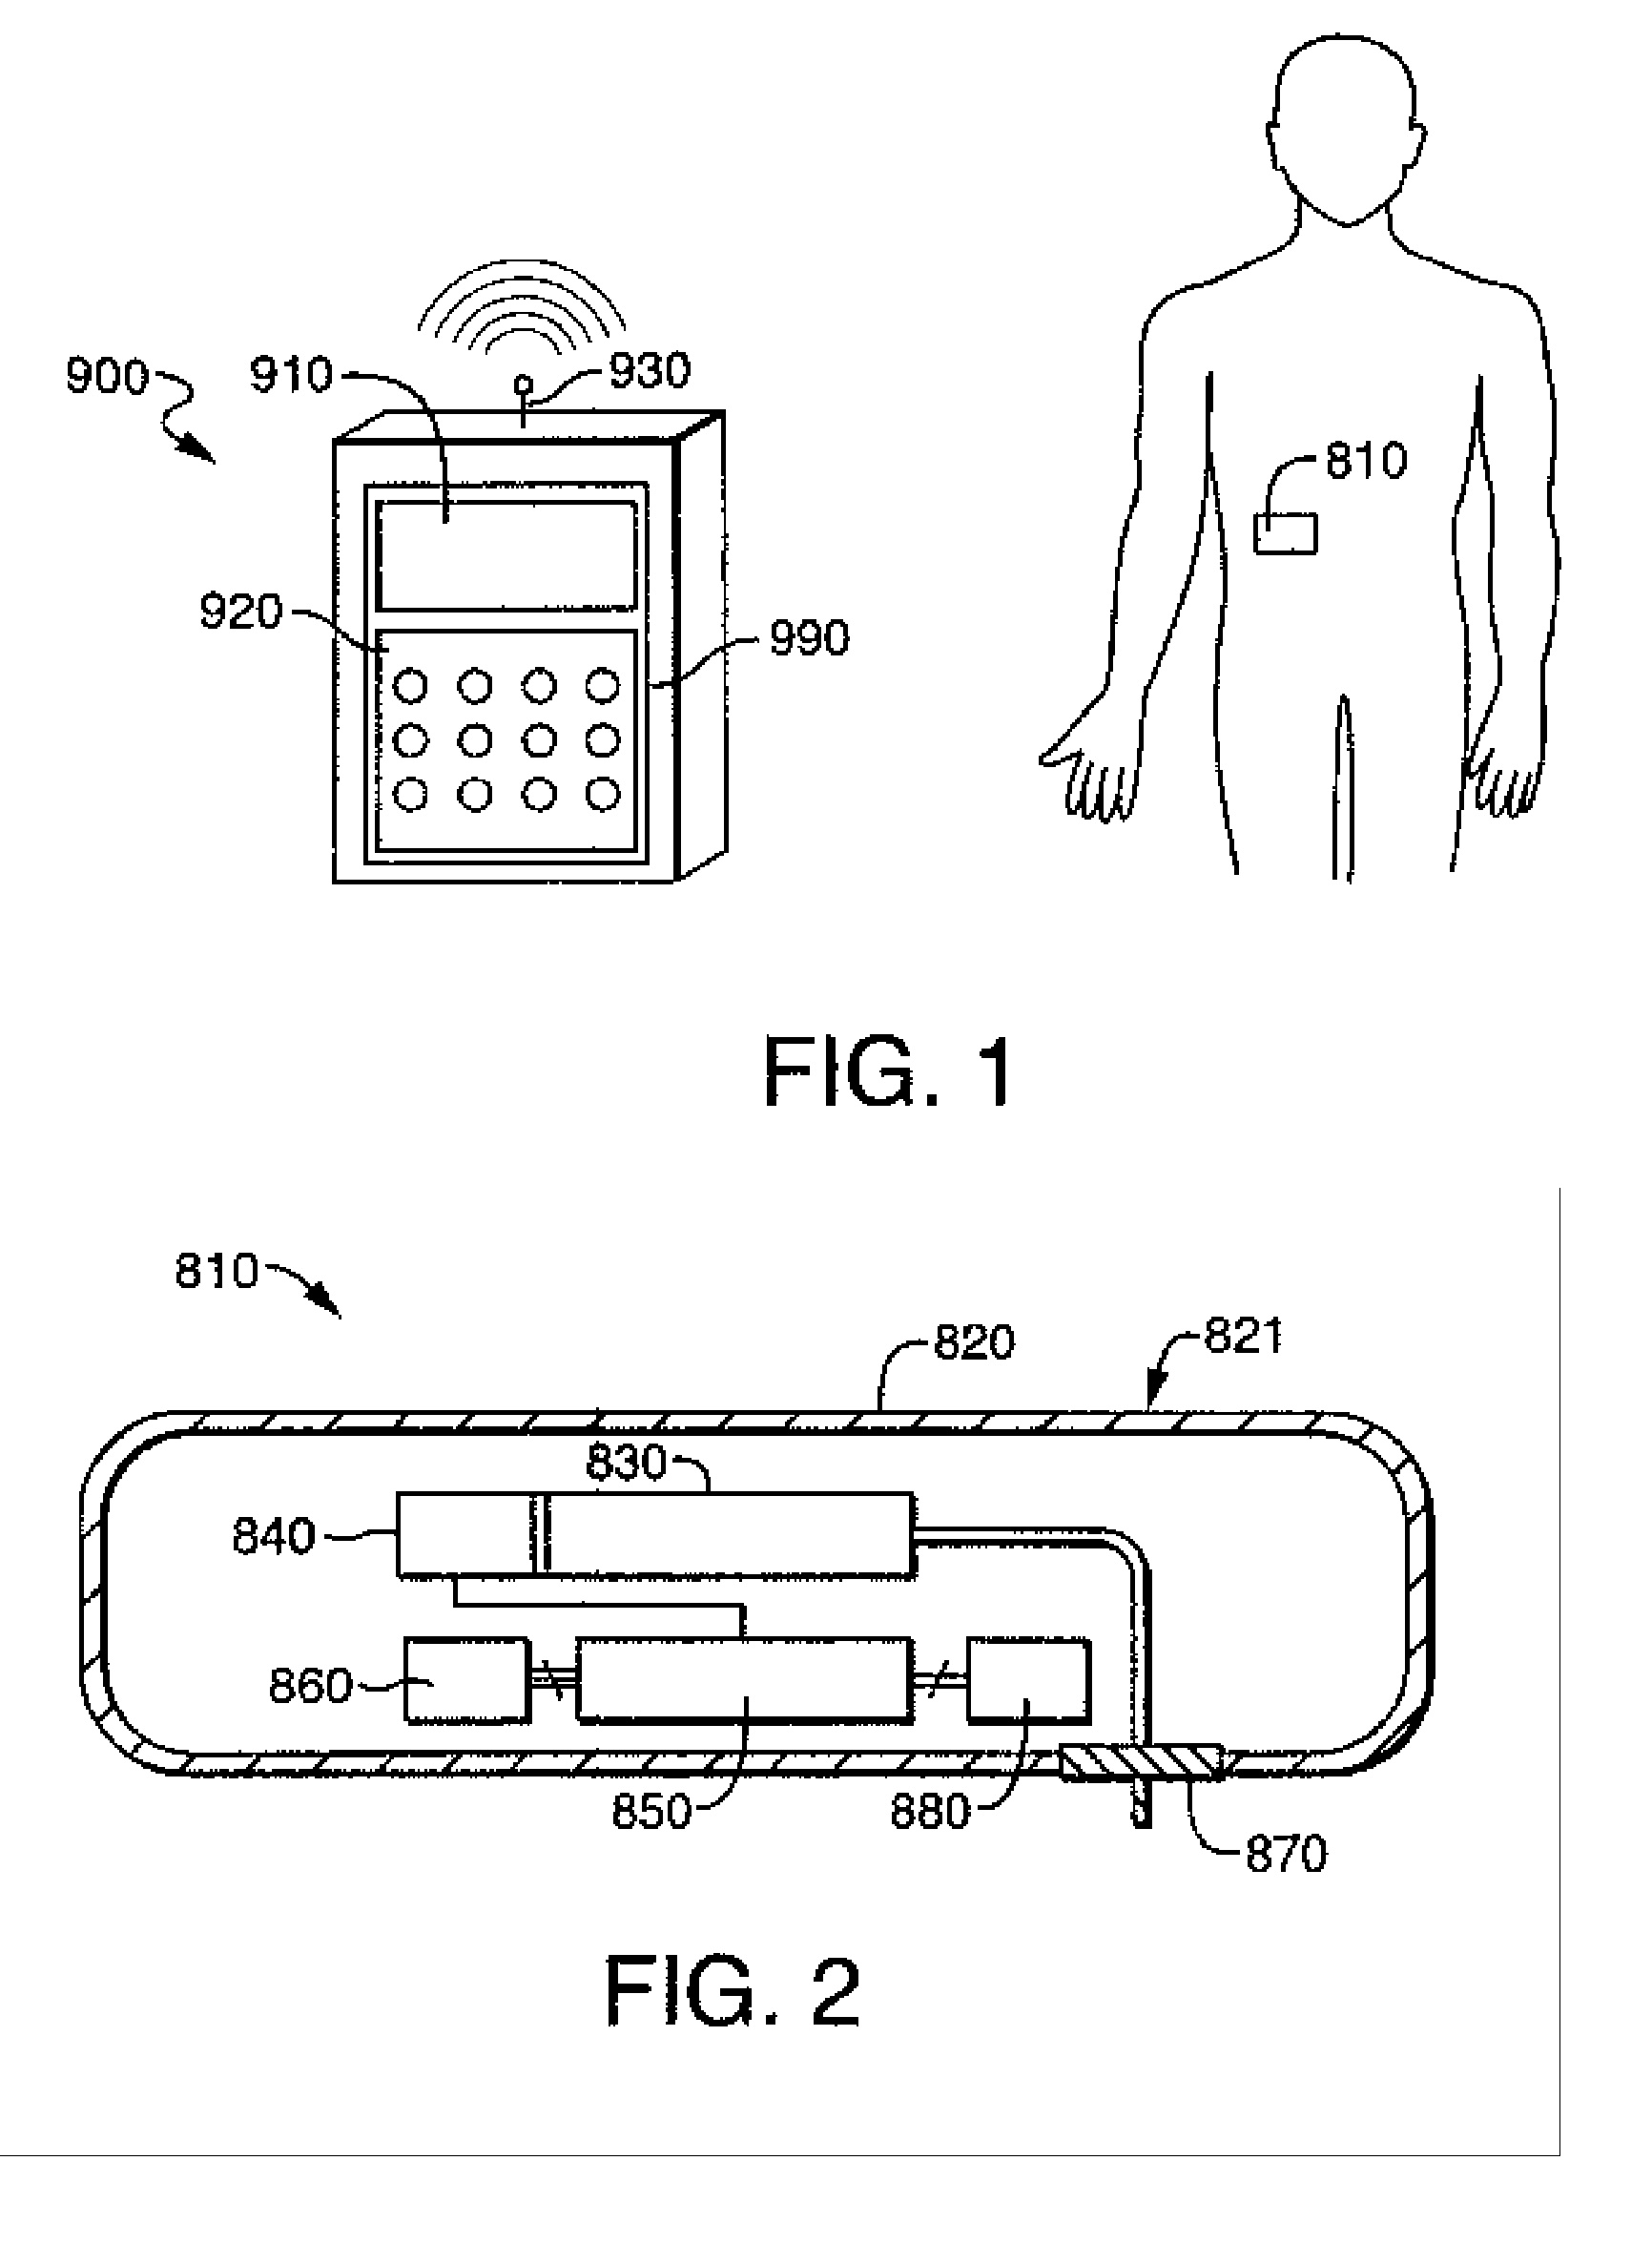 Transcutaneous fluid delivery system